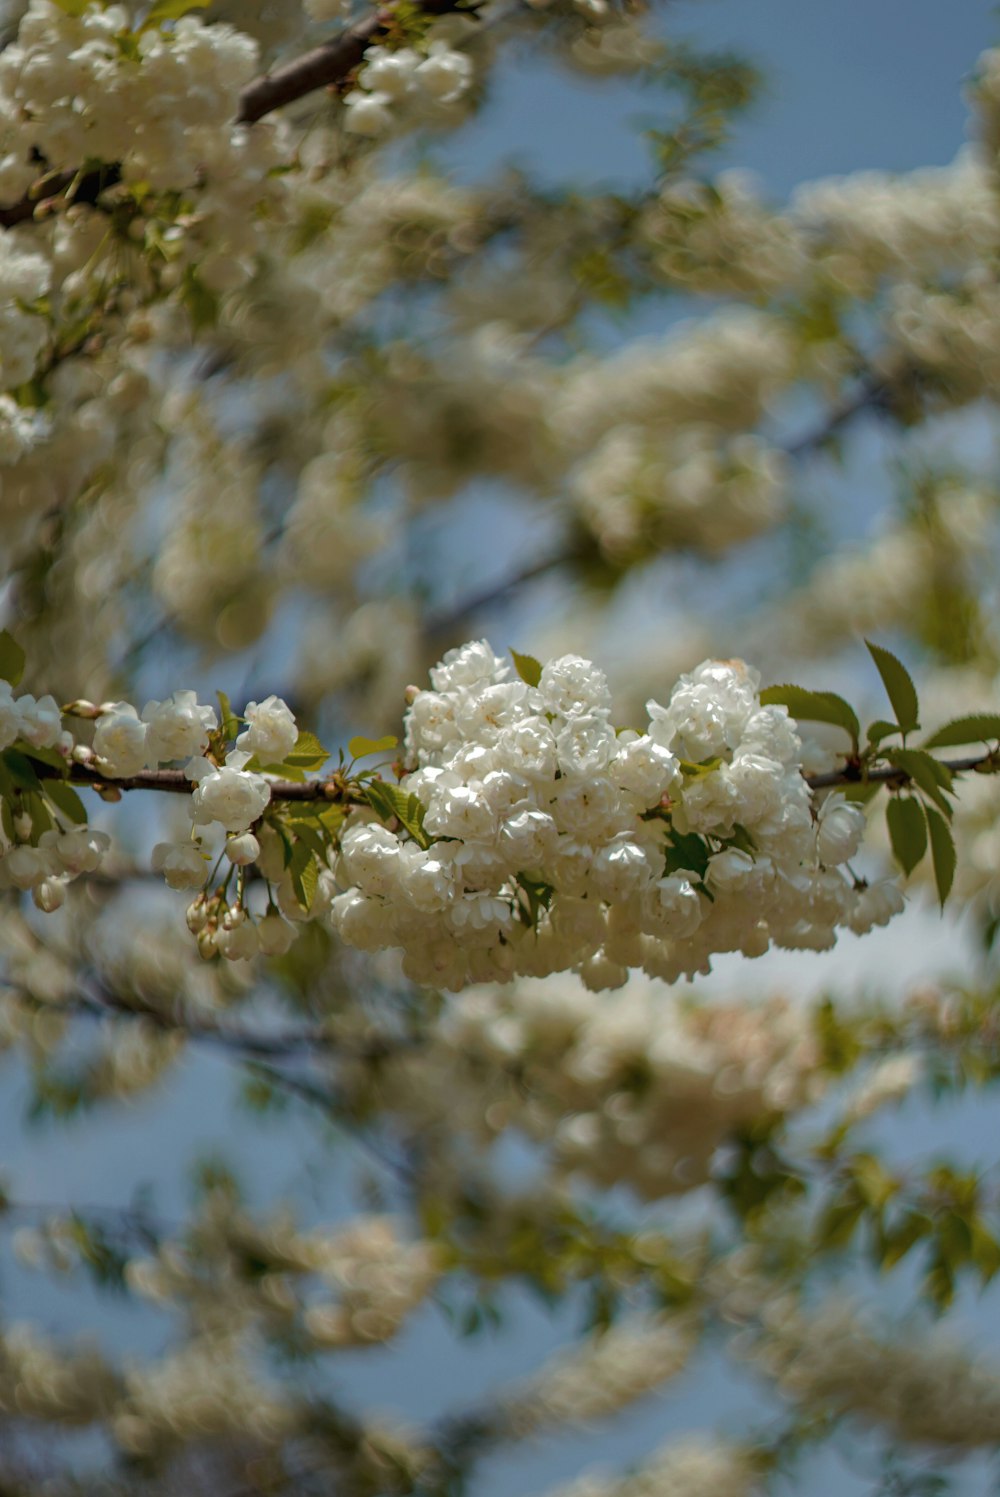 a close up of a tree branch with white flowers